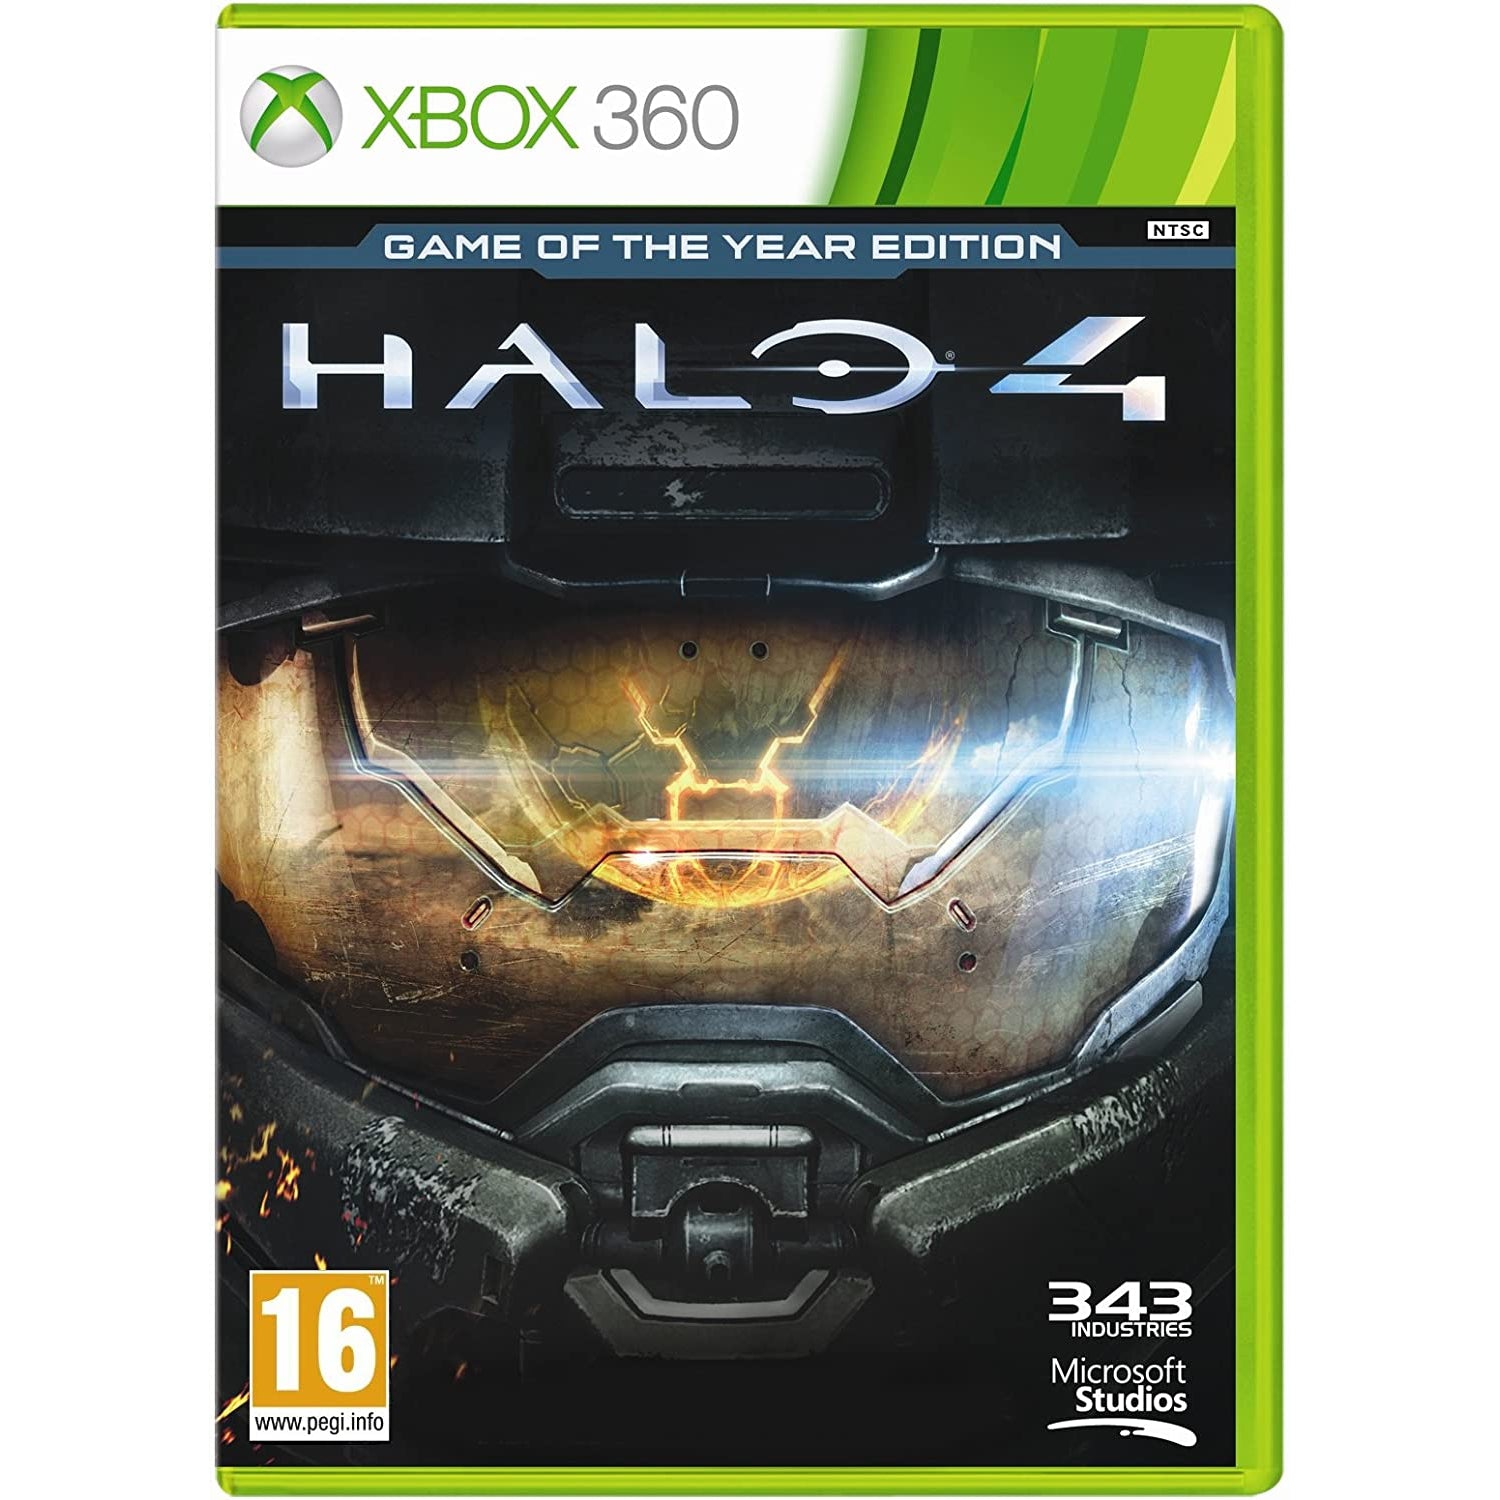 Halo 4 - Game of the Year (Xbox 360)